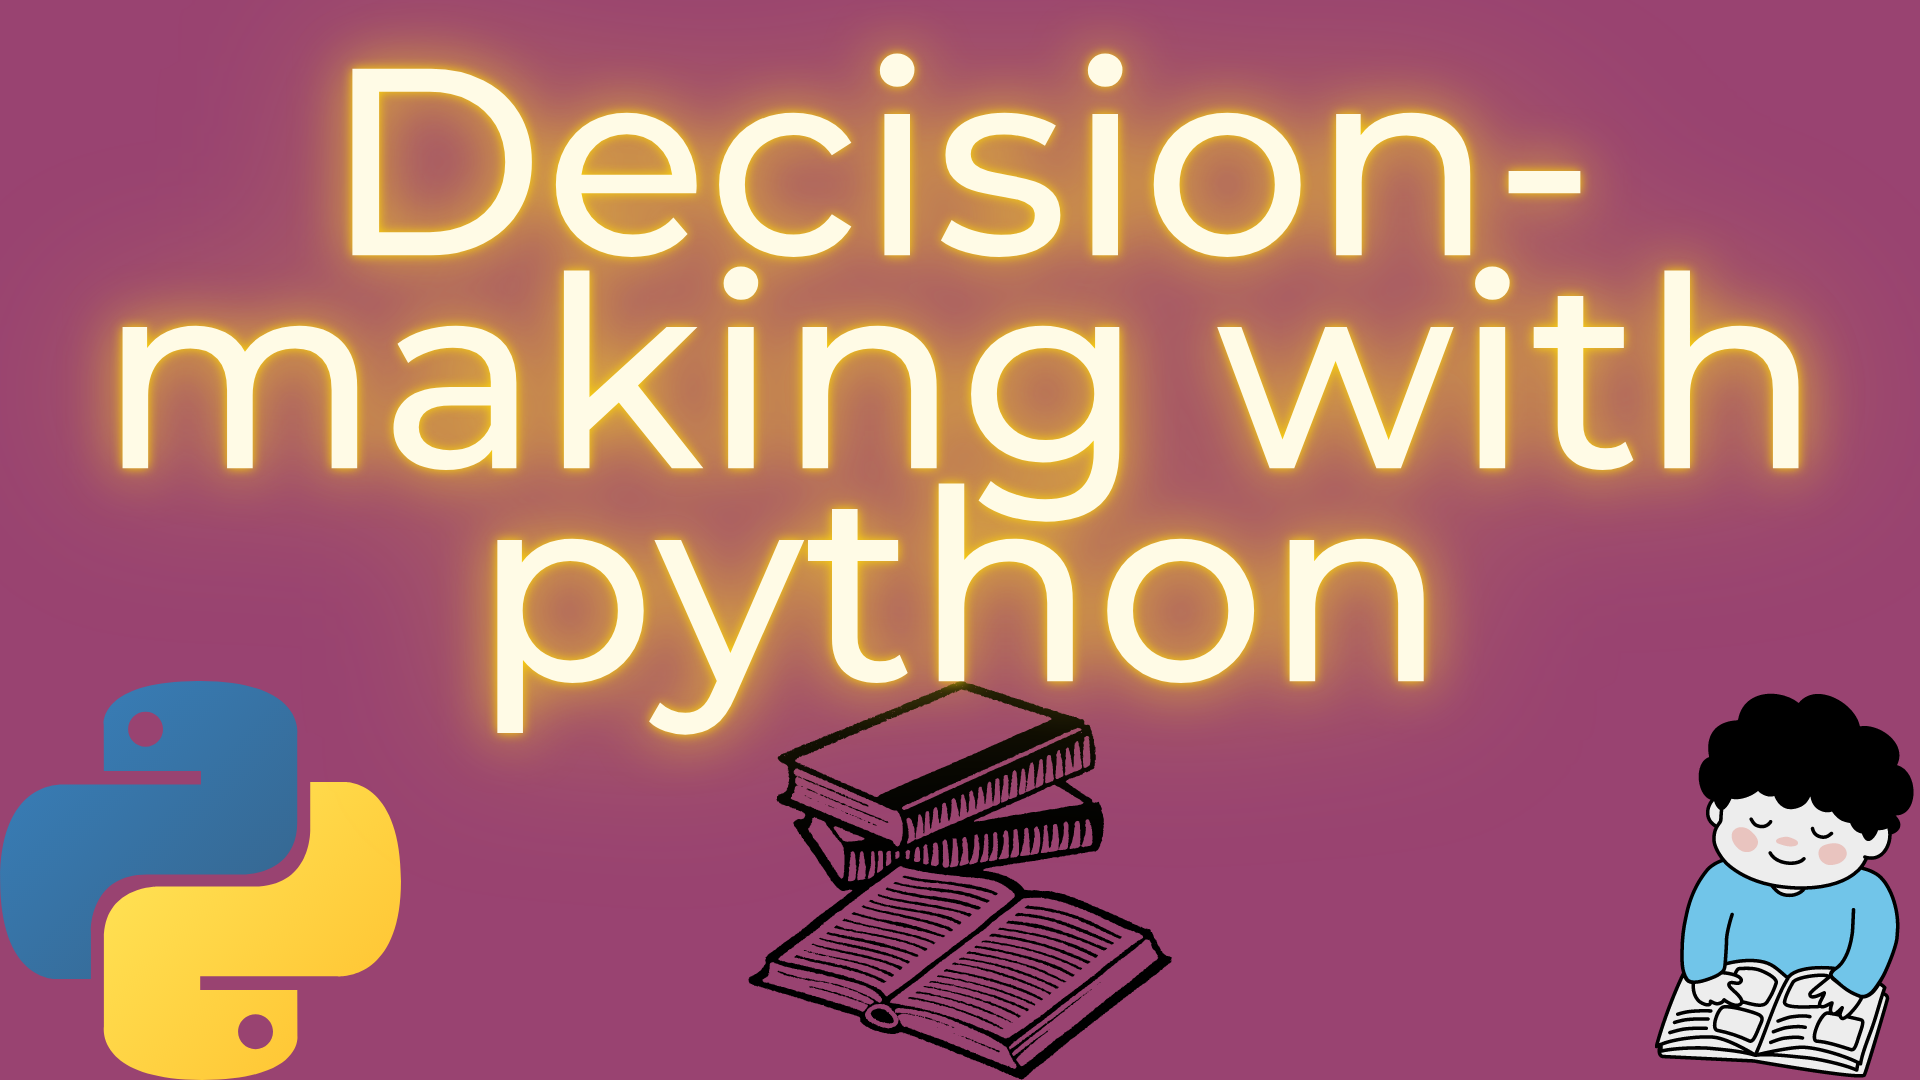 Decision making with python